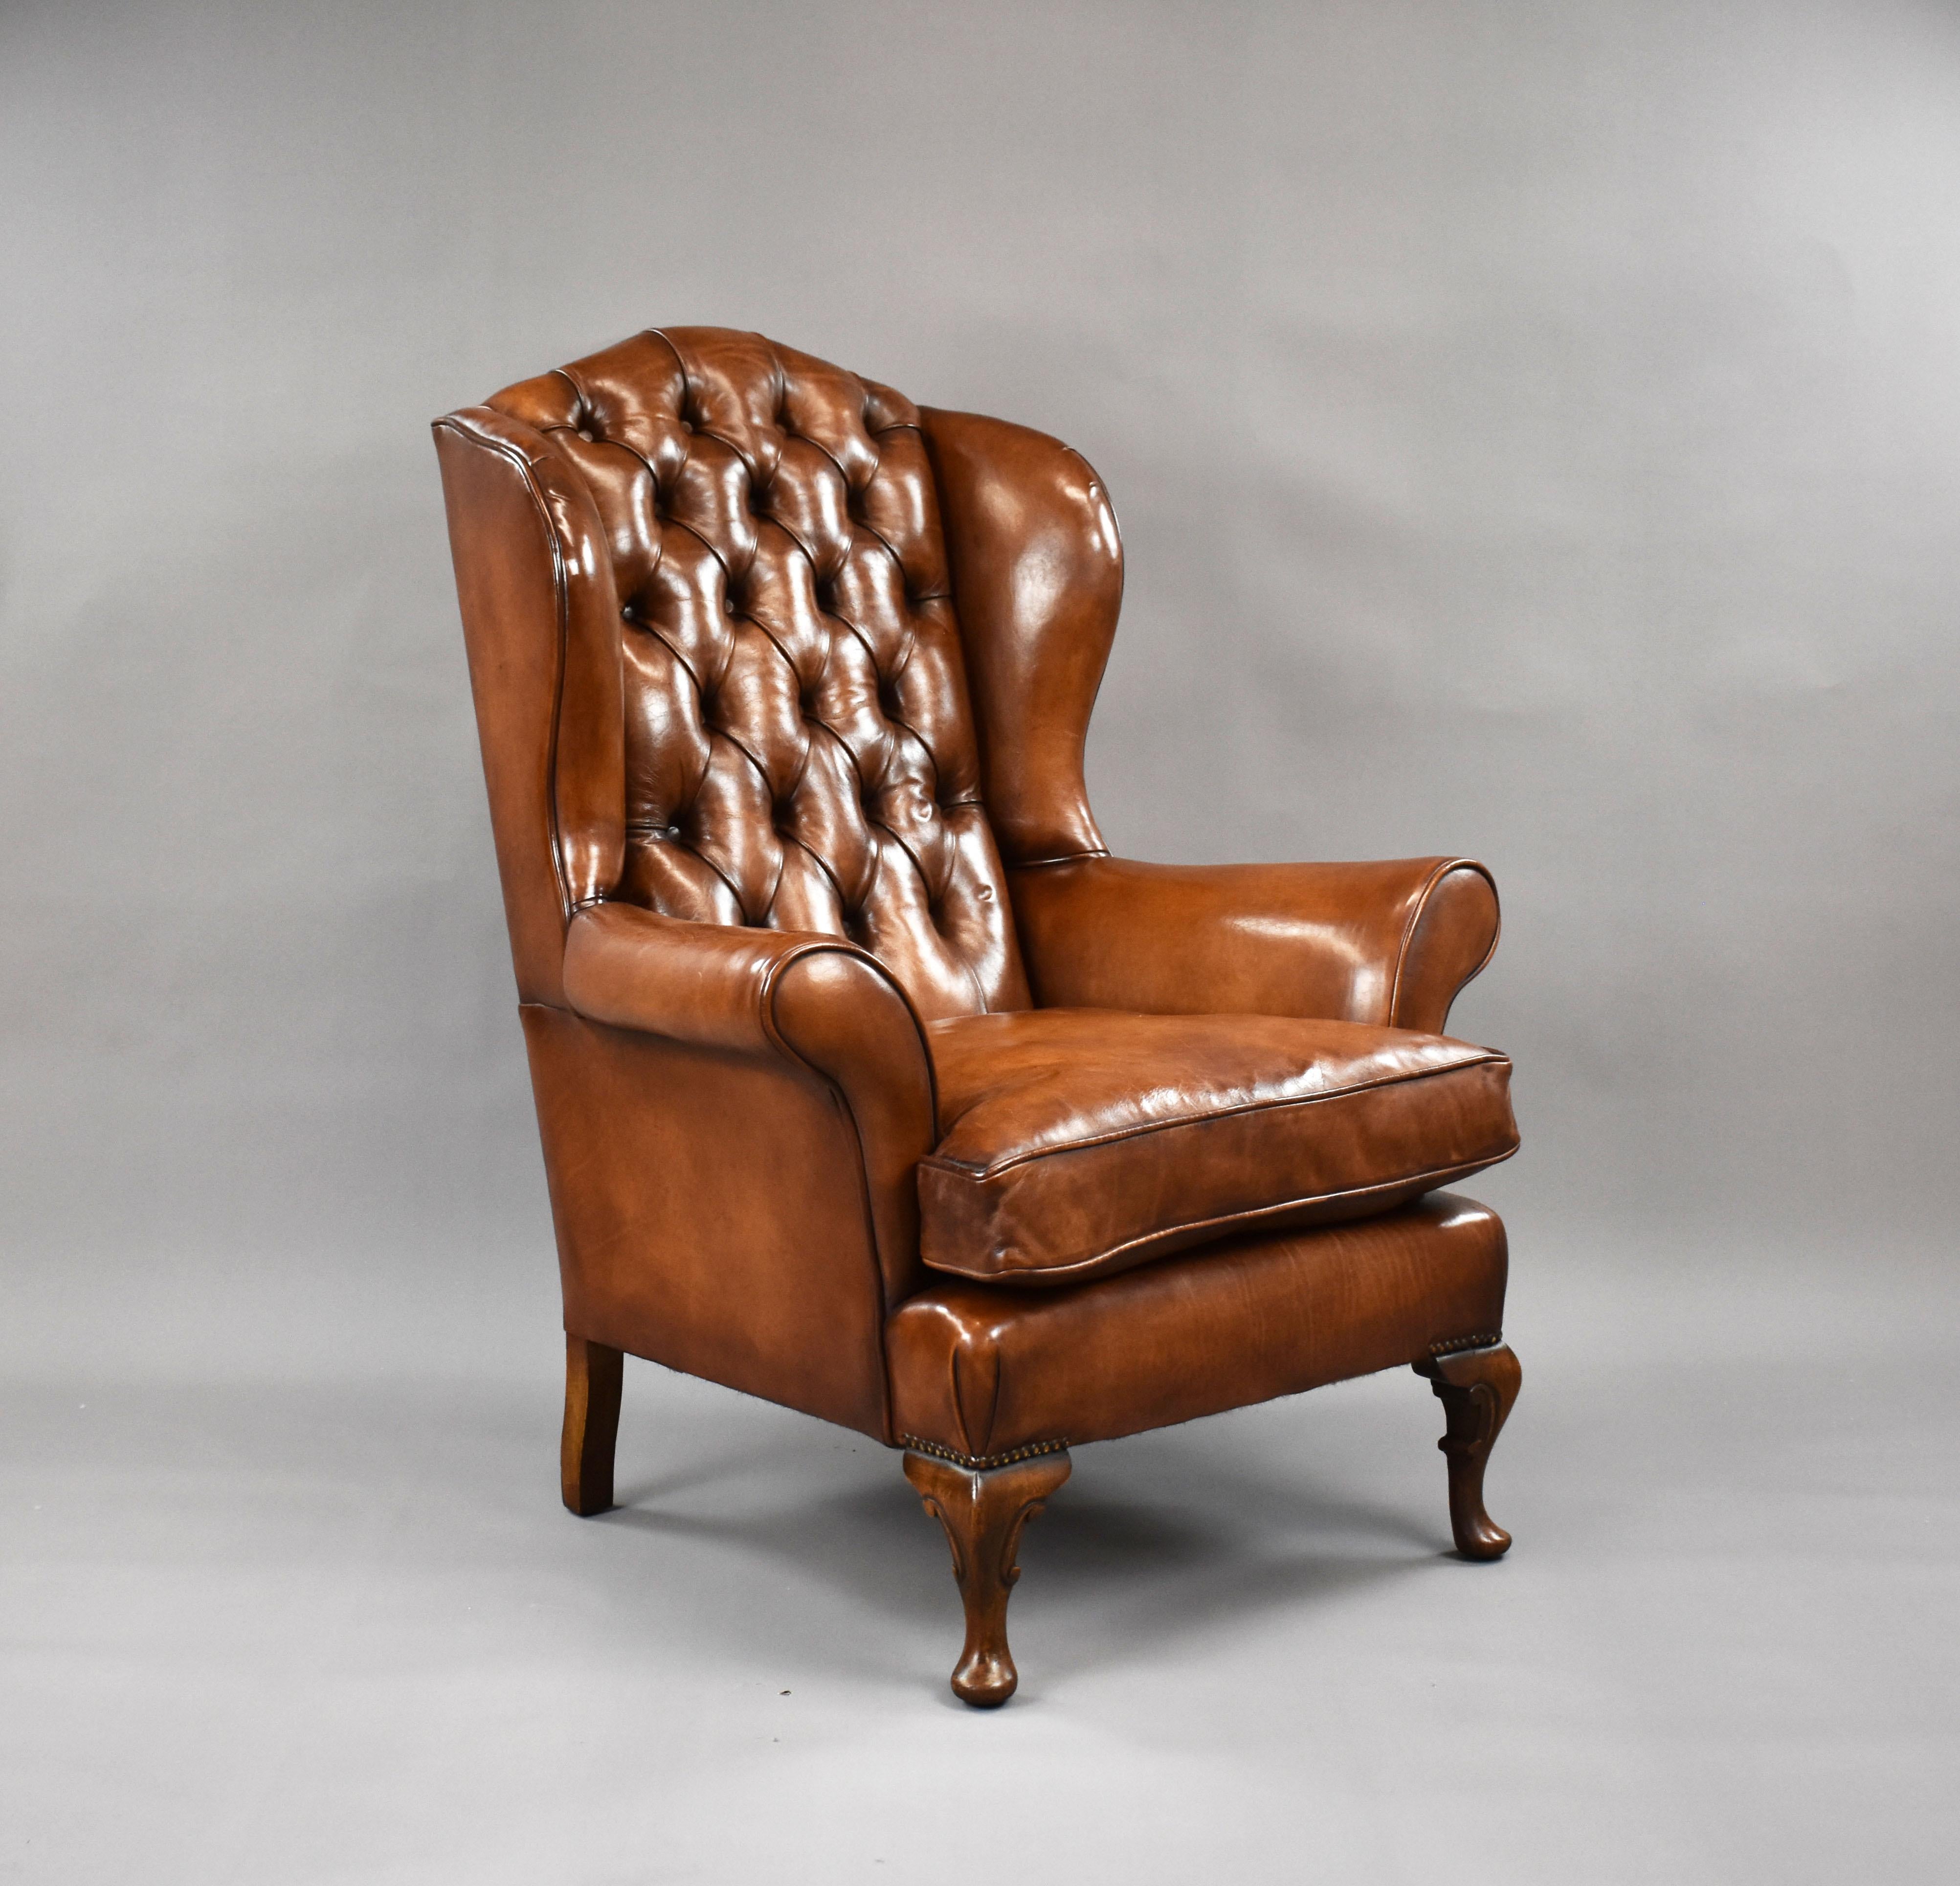 For sale is a good quality Edwardian mahogany hand dyed leather wing back armchair, having a deep buttoned back, with two scroll arms, standing on small carved cabriole legs. The chair is in very good condition for its age.

Measures: Width: 86cm,